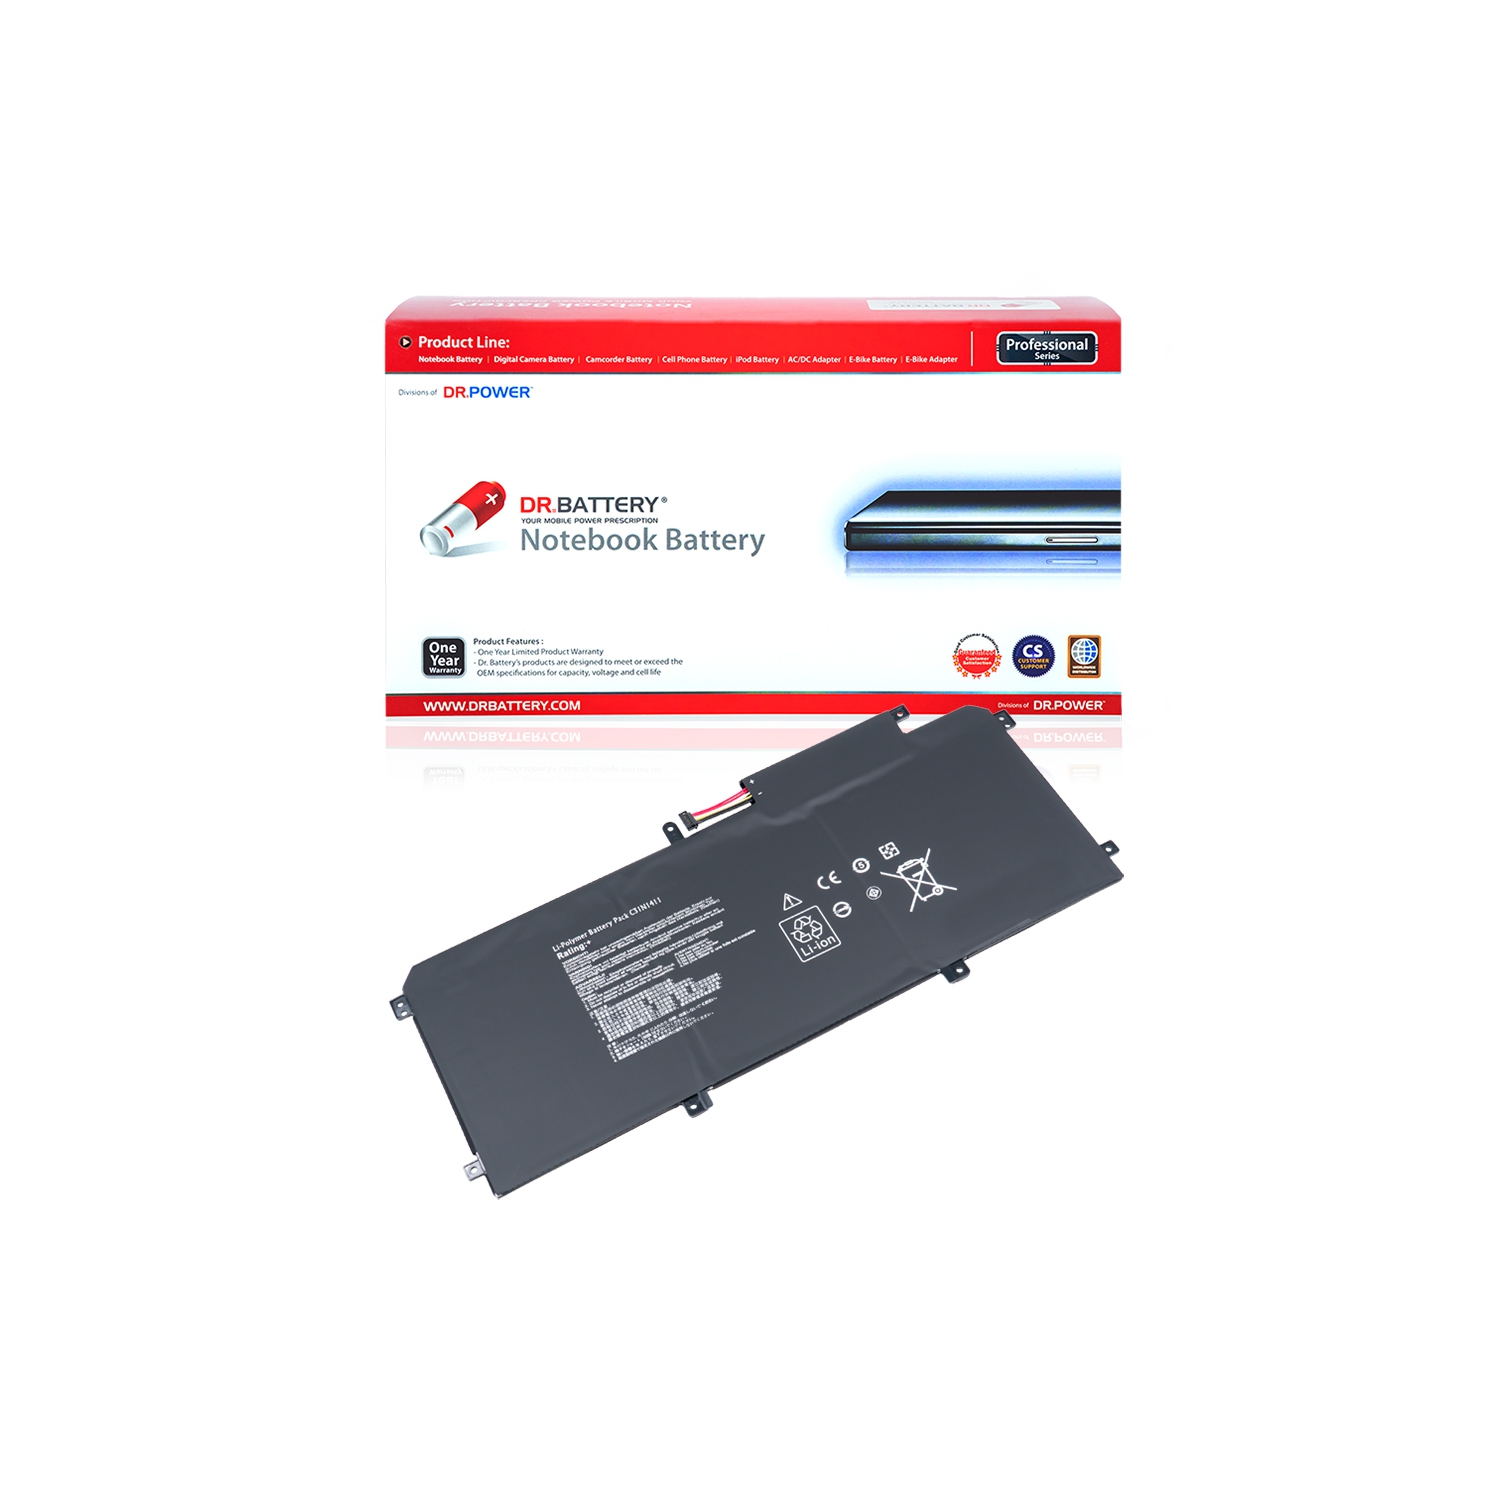 DR. BATTERY - Replacement for Asus ZenBook UX305F / UX305FA / UX305FA-1A / UX305FA-1B / UX305FA-1C / 0B200-01180000 / C31N1411 [11.4V / 3830mAh / 43.6Wh] ***Free Shipping***